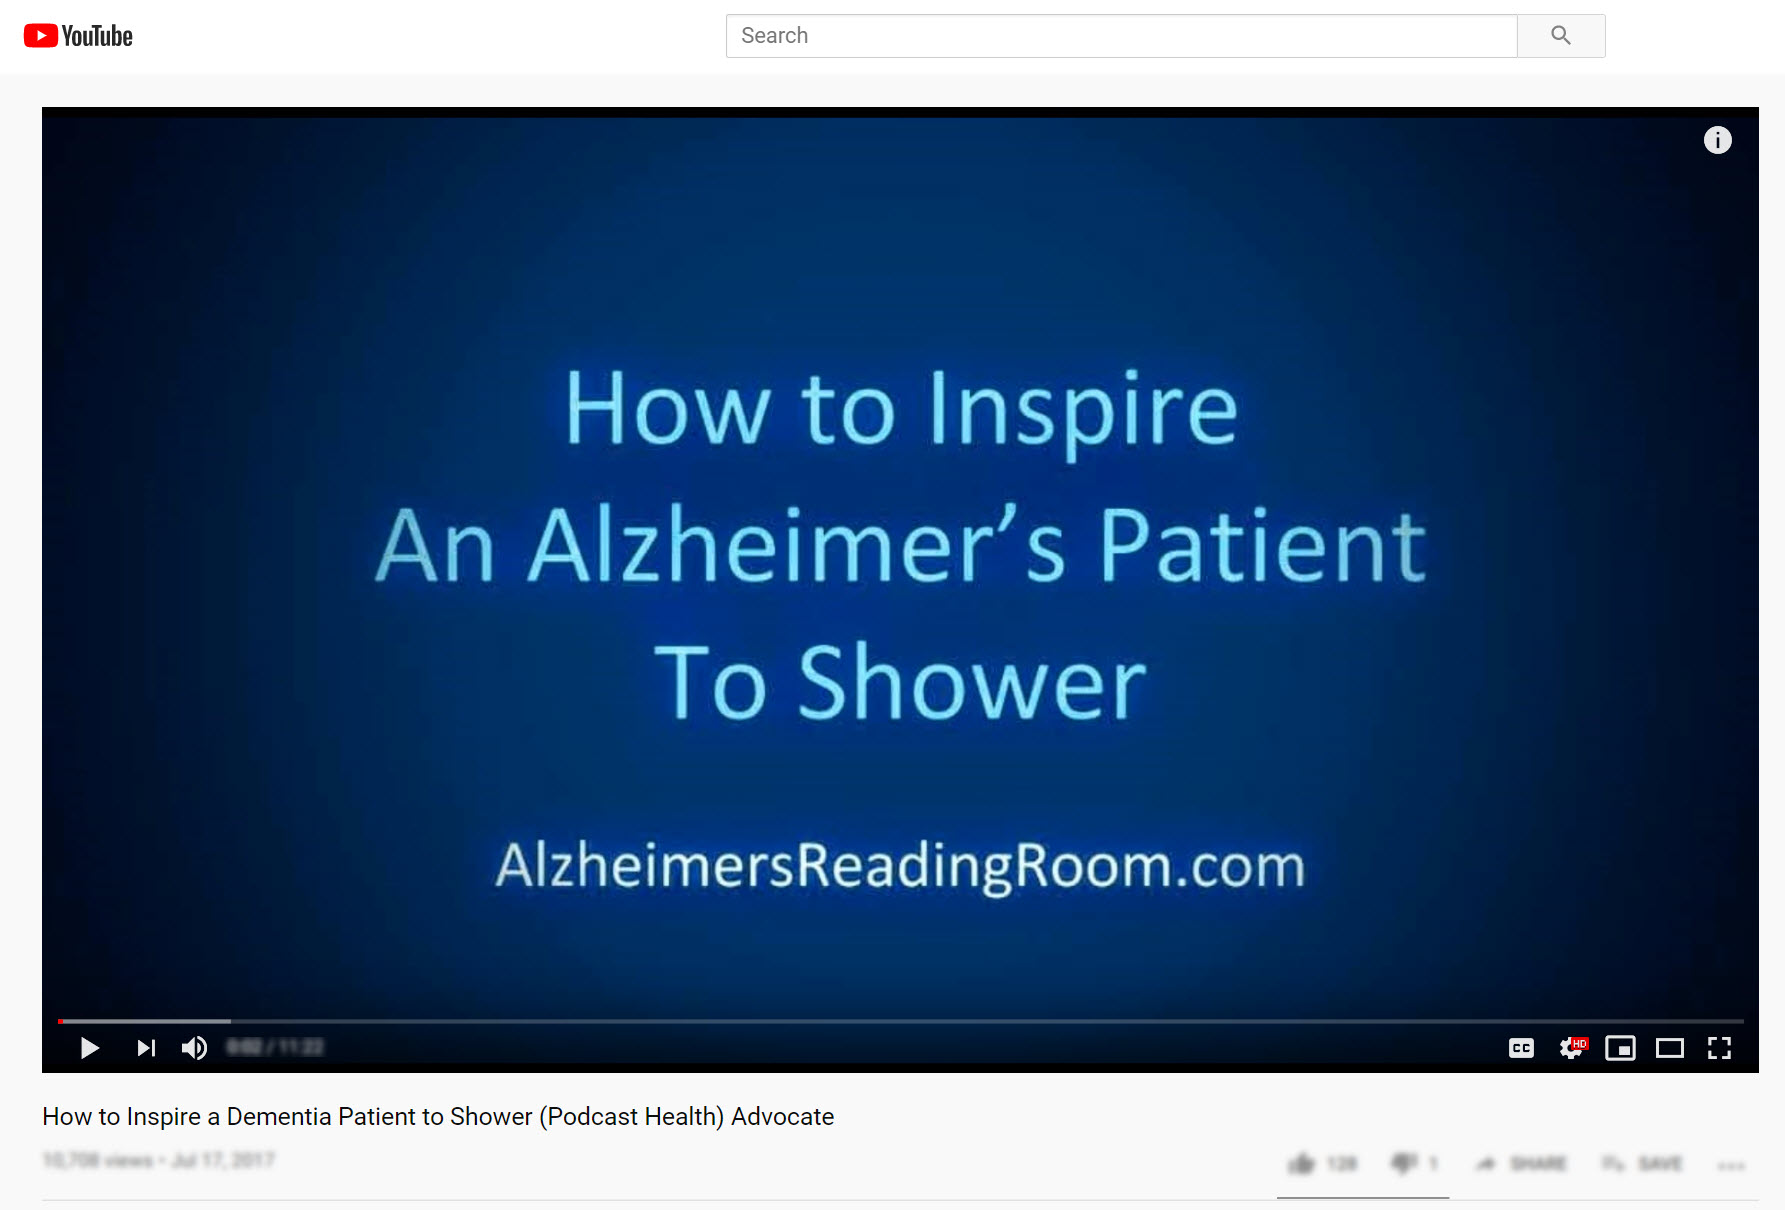 How to Inspire a Dementia Patient to Shower